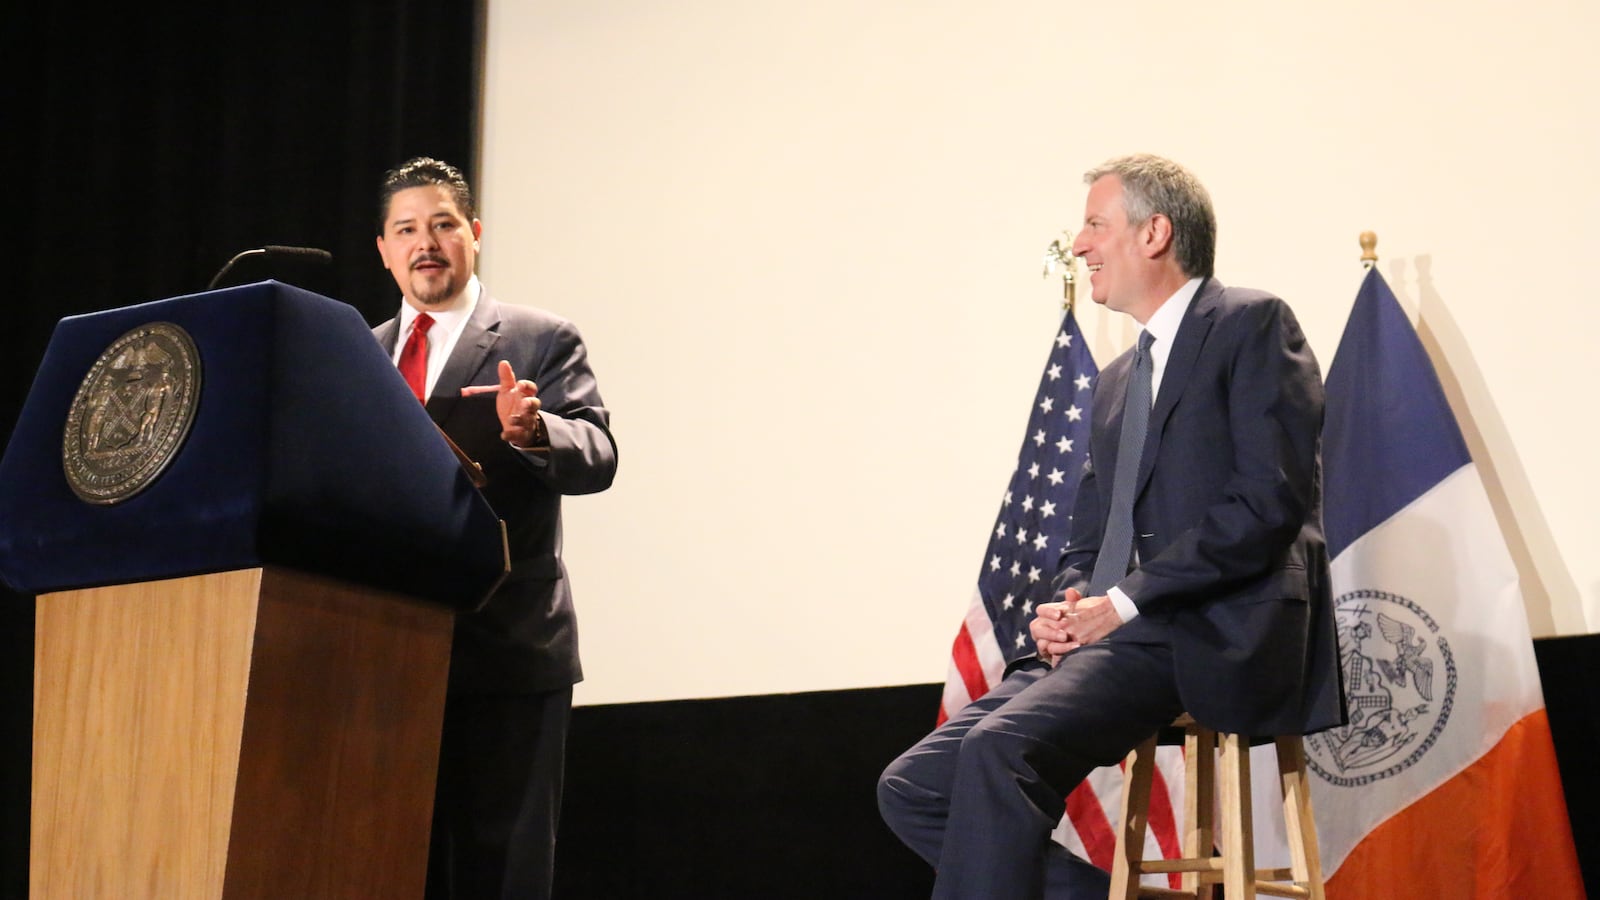 Chancellor Richard Carranza delivered his first public comments Tuesday at Stuyvesant High School.